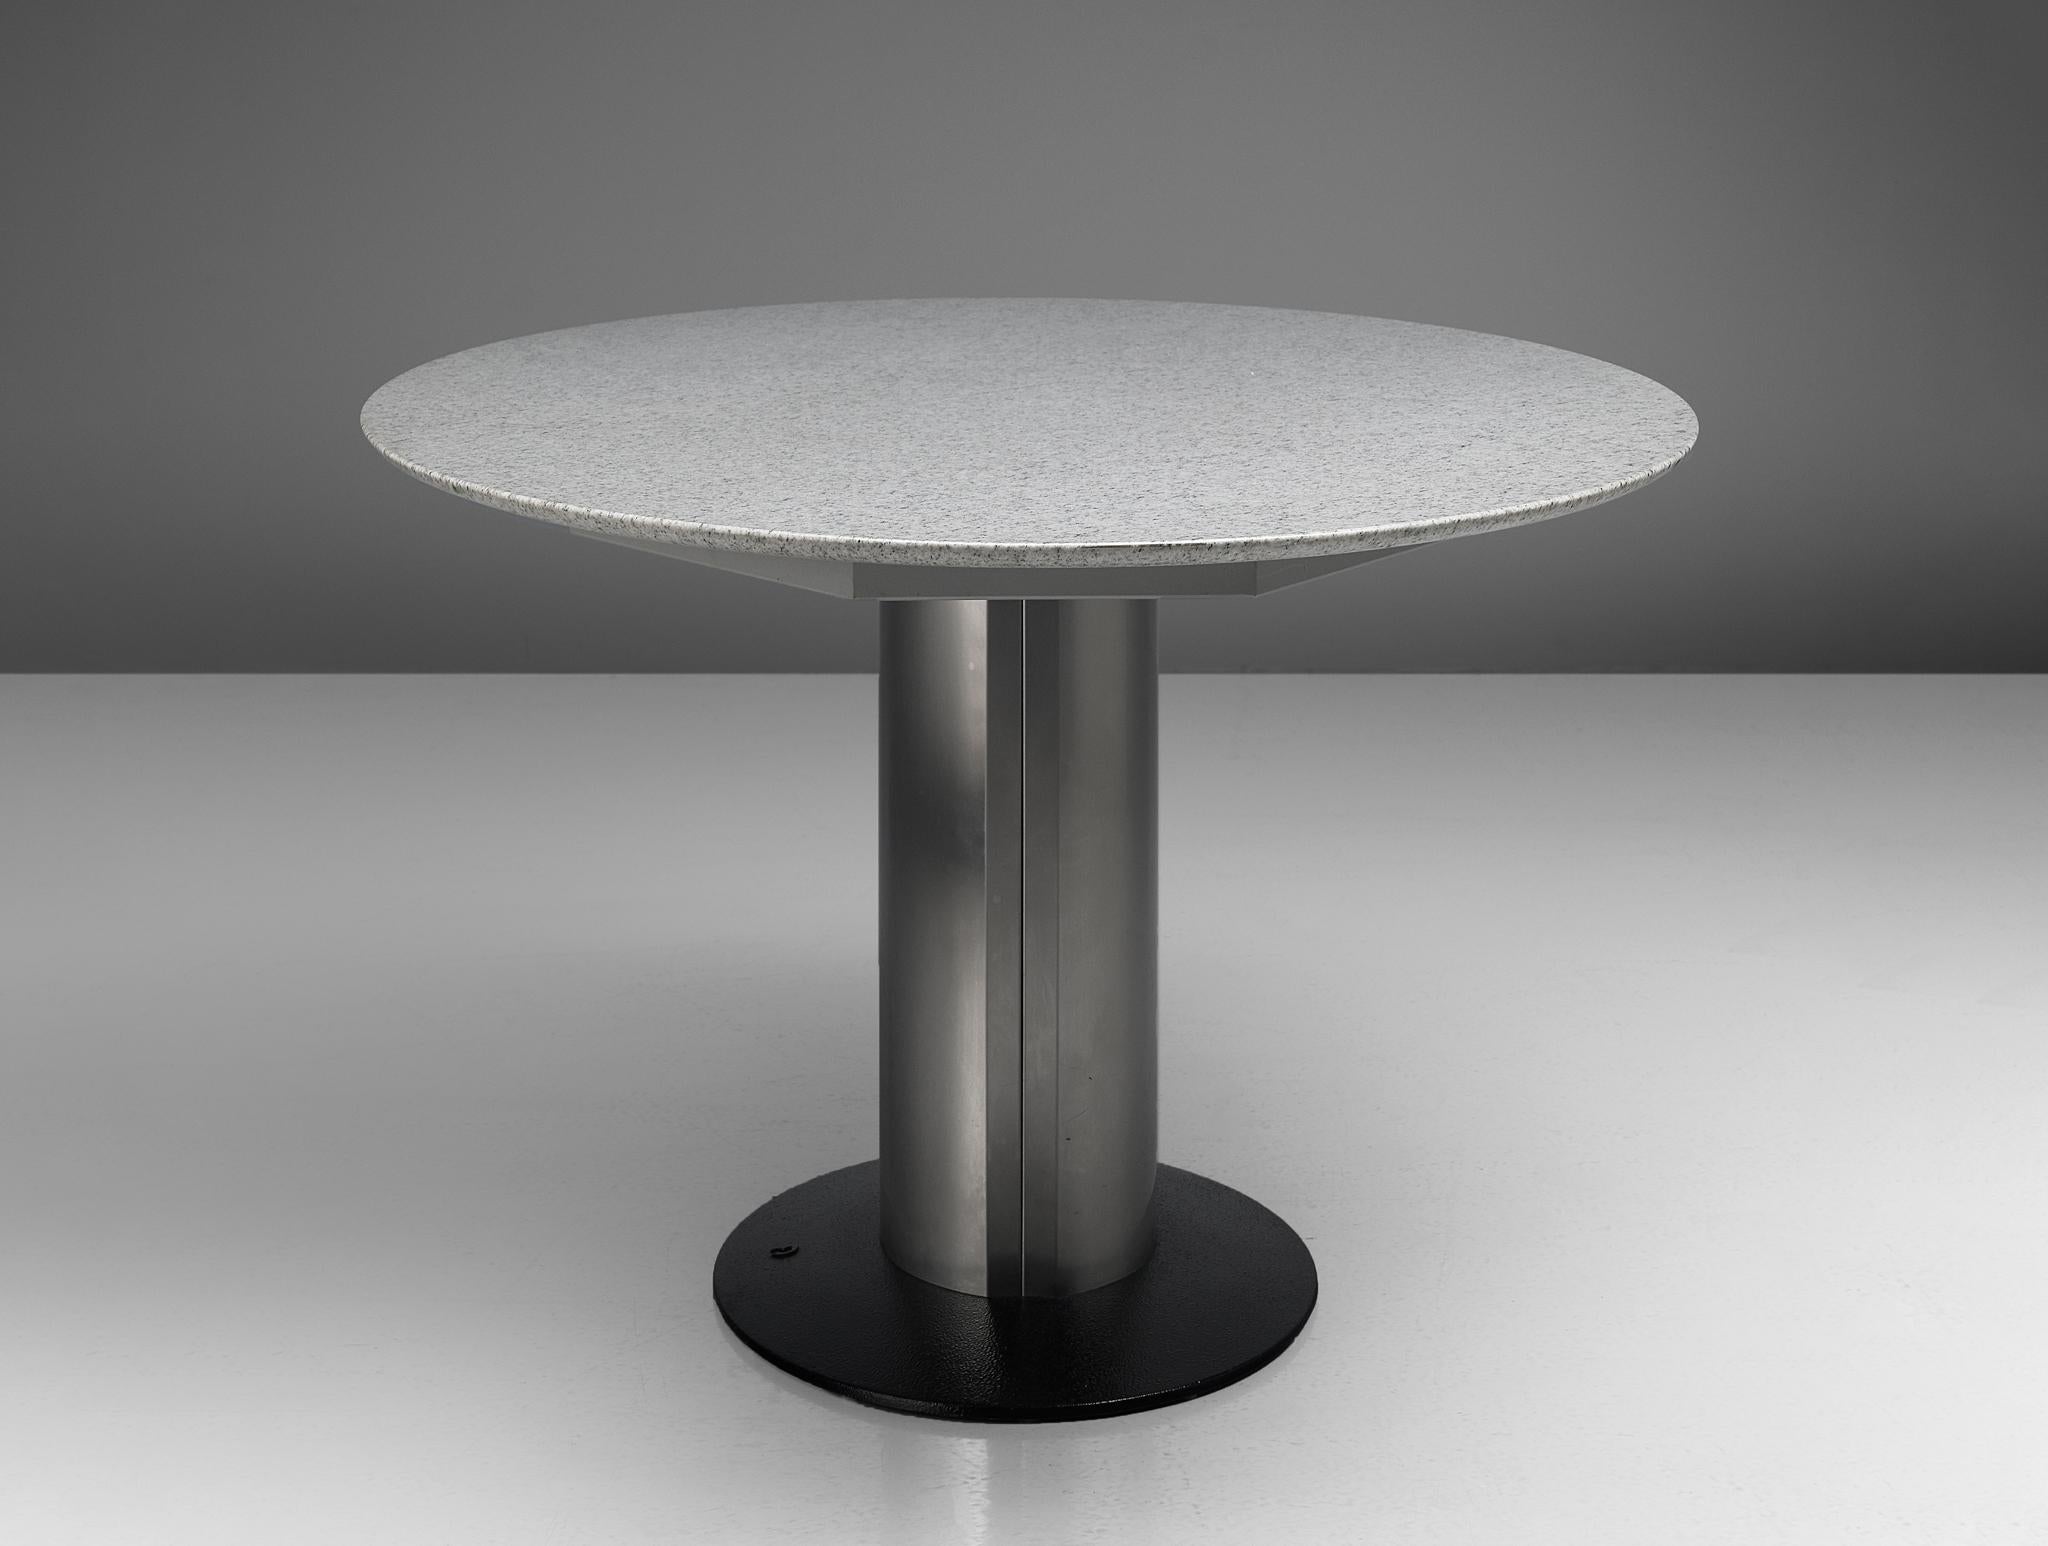 German Oval Pedestal Dining Table with White Granite Top